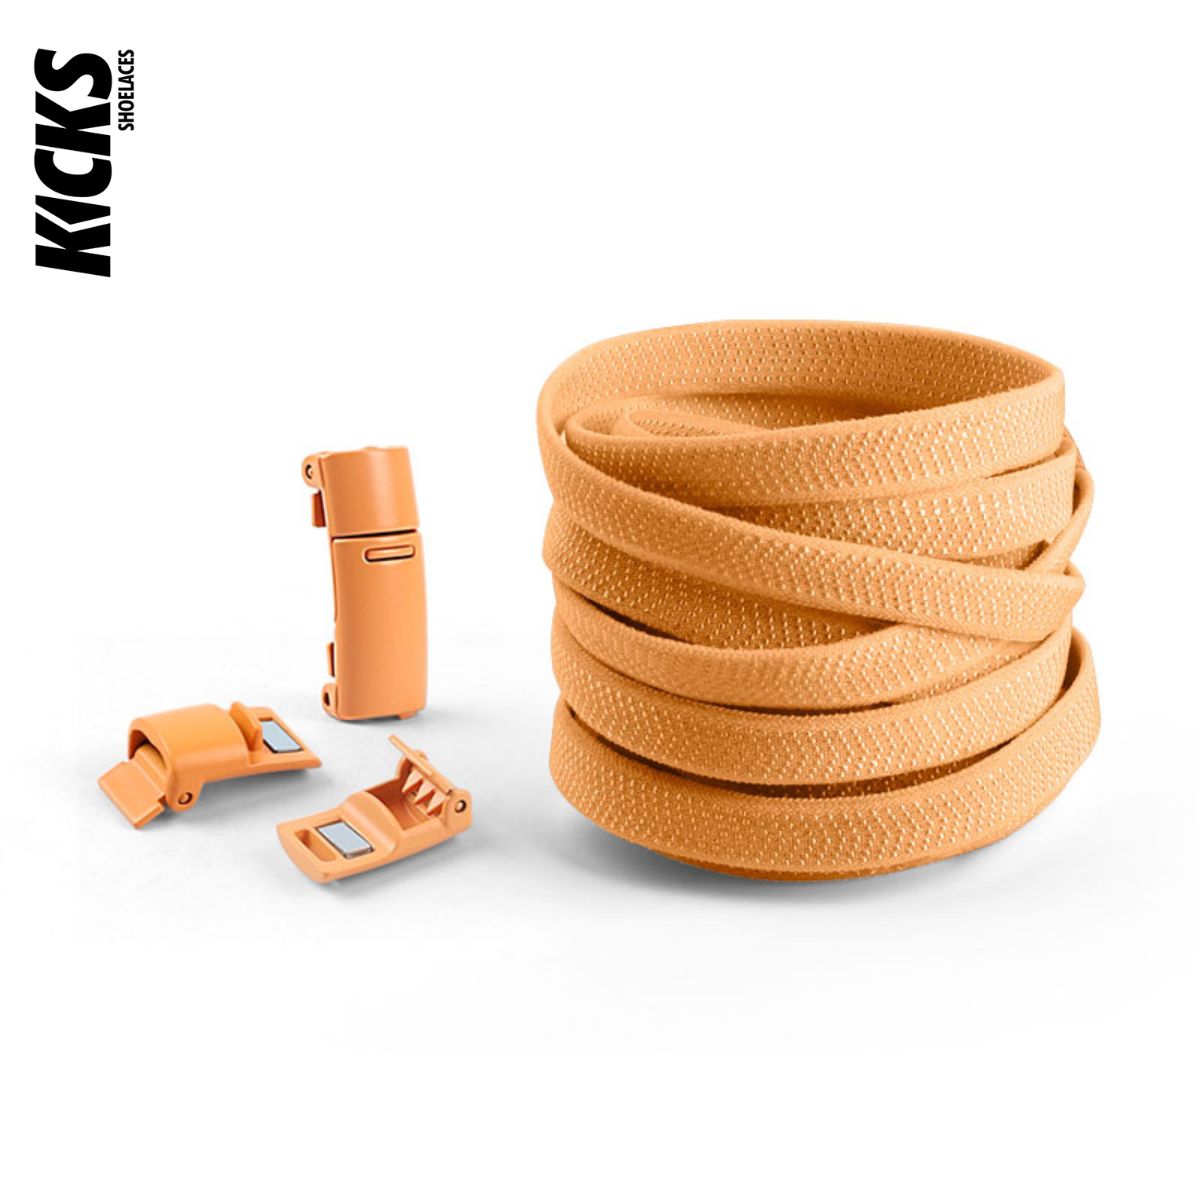 Light Brown No-Tie Shoelaces with Magnetic Locks - Kicks Shoelaces